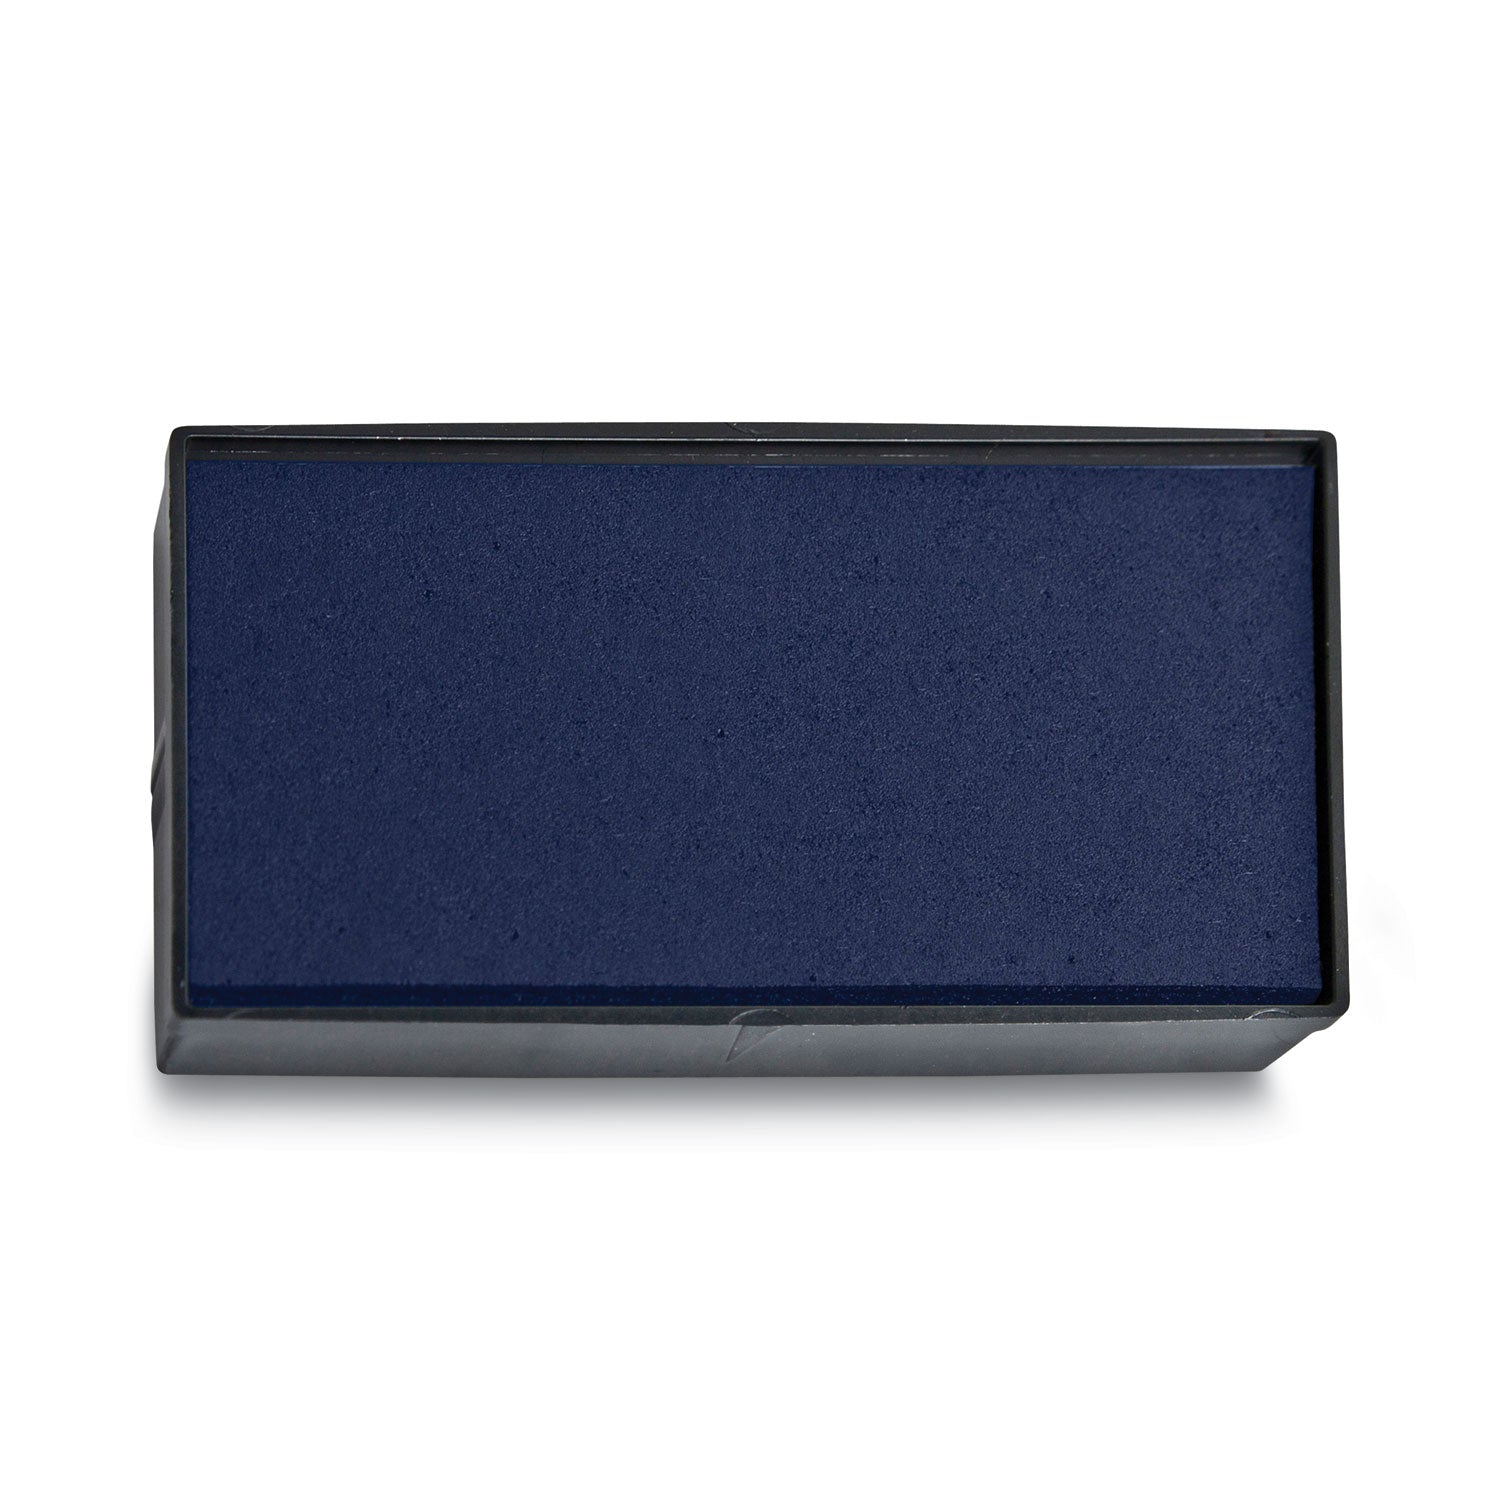 Replacement Ink Pad for 2000PLUS 1SI20PGL, 1.63" x 0.25", Blue - 